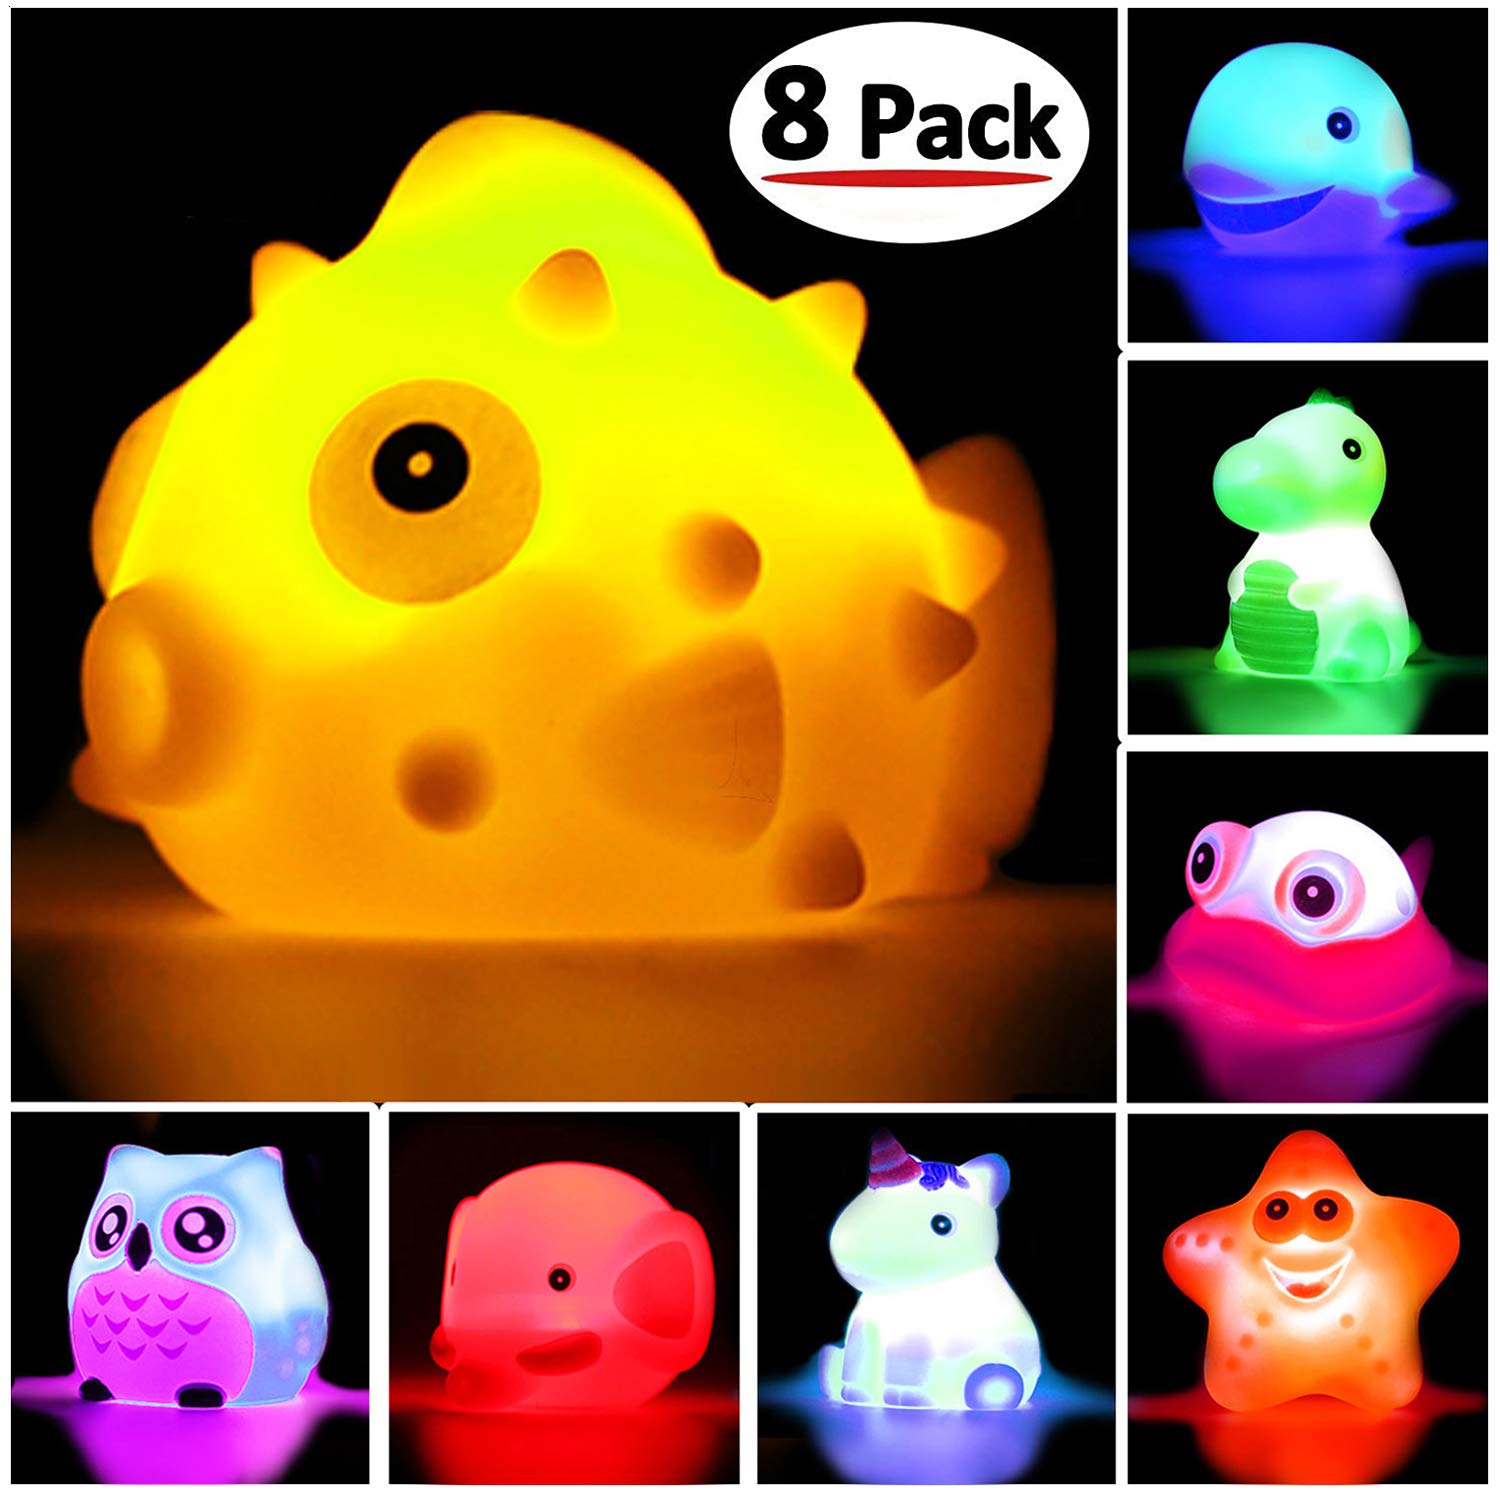 Bath Toys, 8 Pcs Light Up Floating Rubber animal Toys set, Flashing Color Changing Light in Water, Baby Infants Kids Toddler Child Preschool Bathtub Bathroom Shower Games Swimming Pool Party